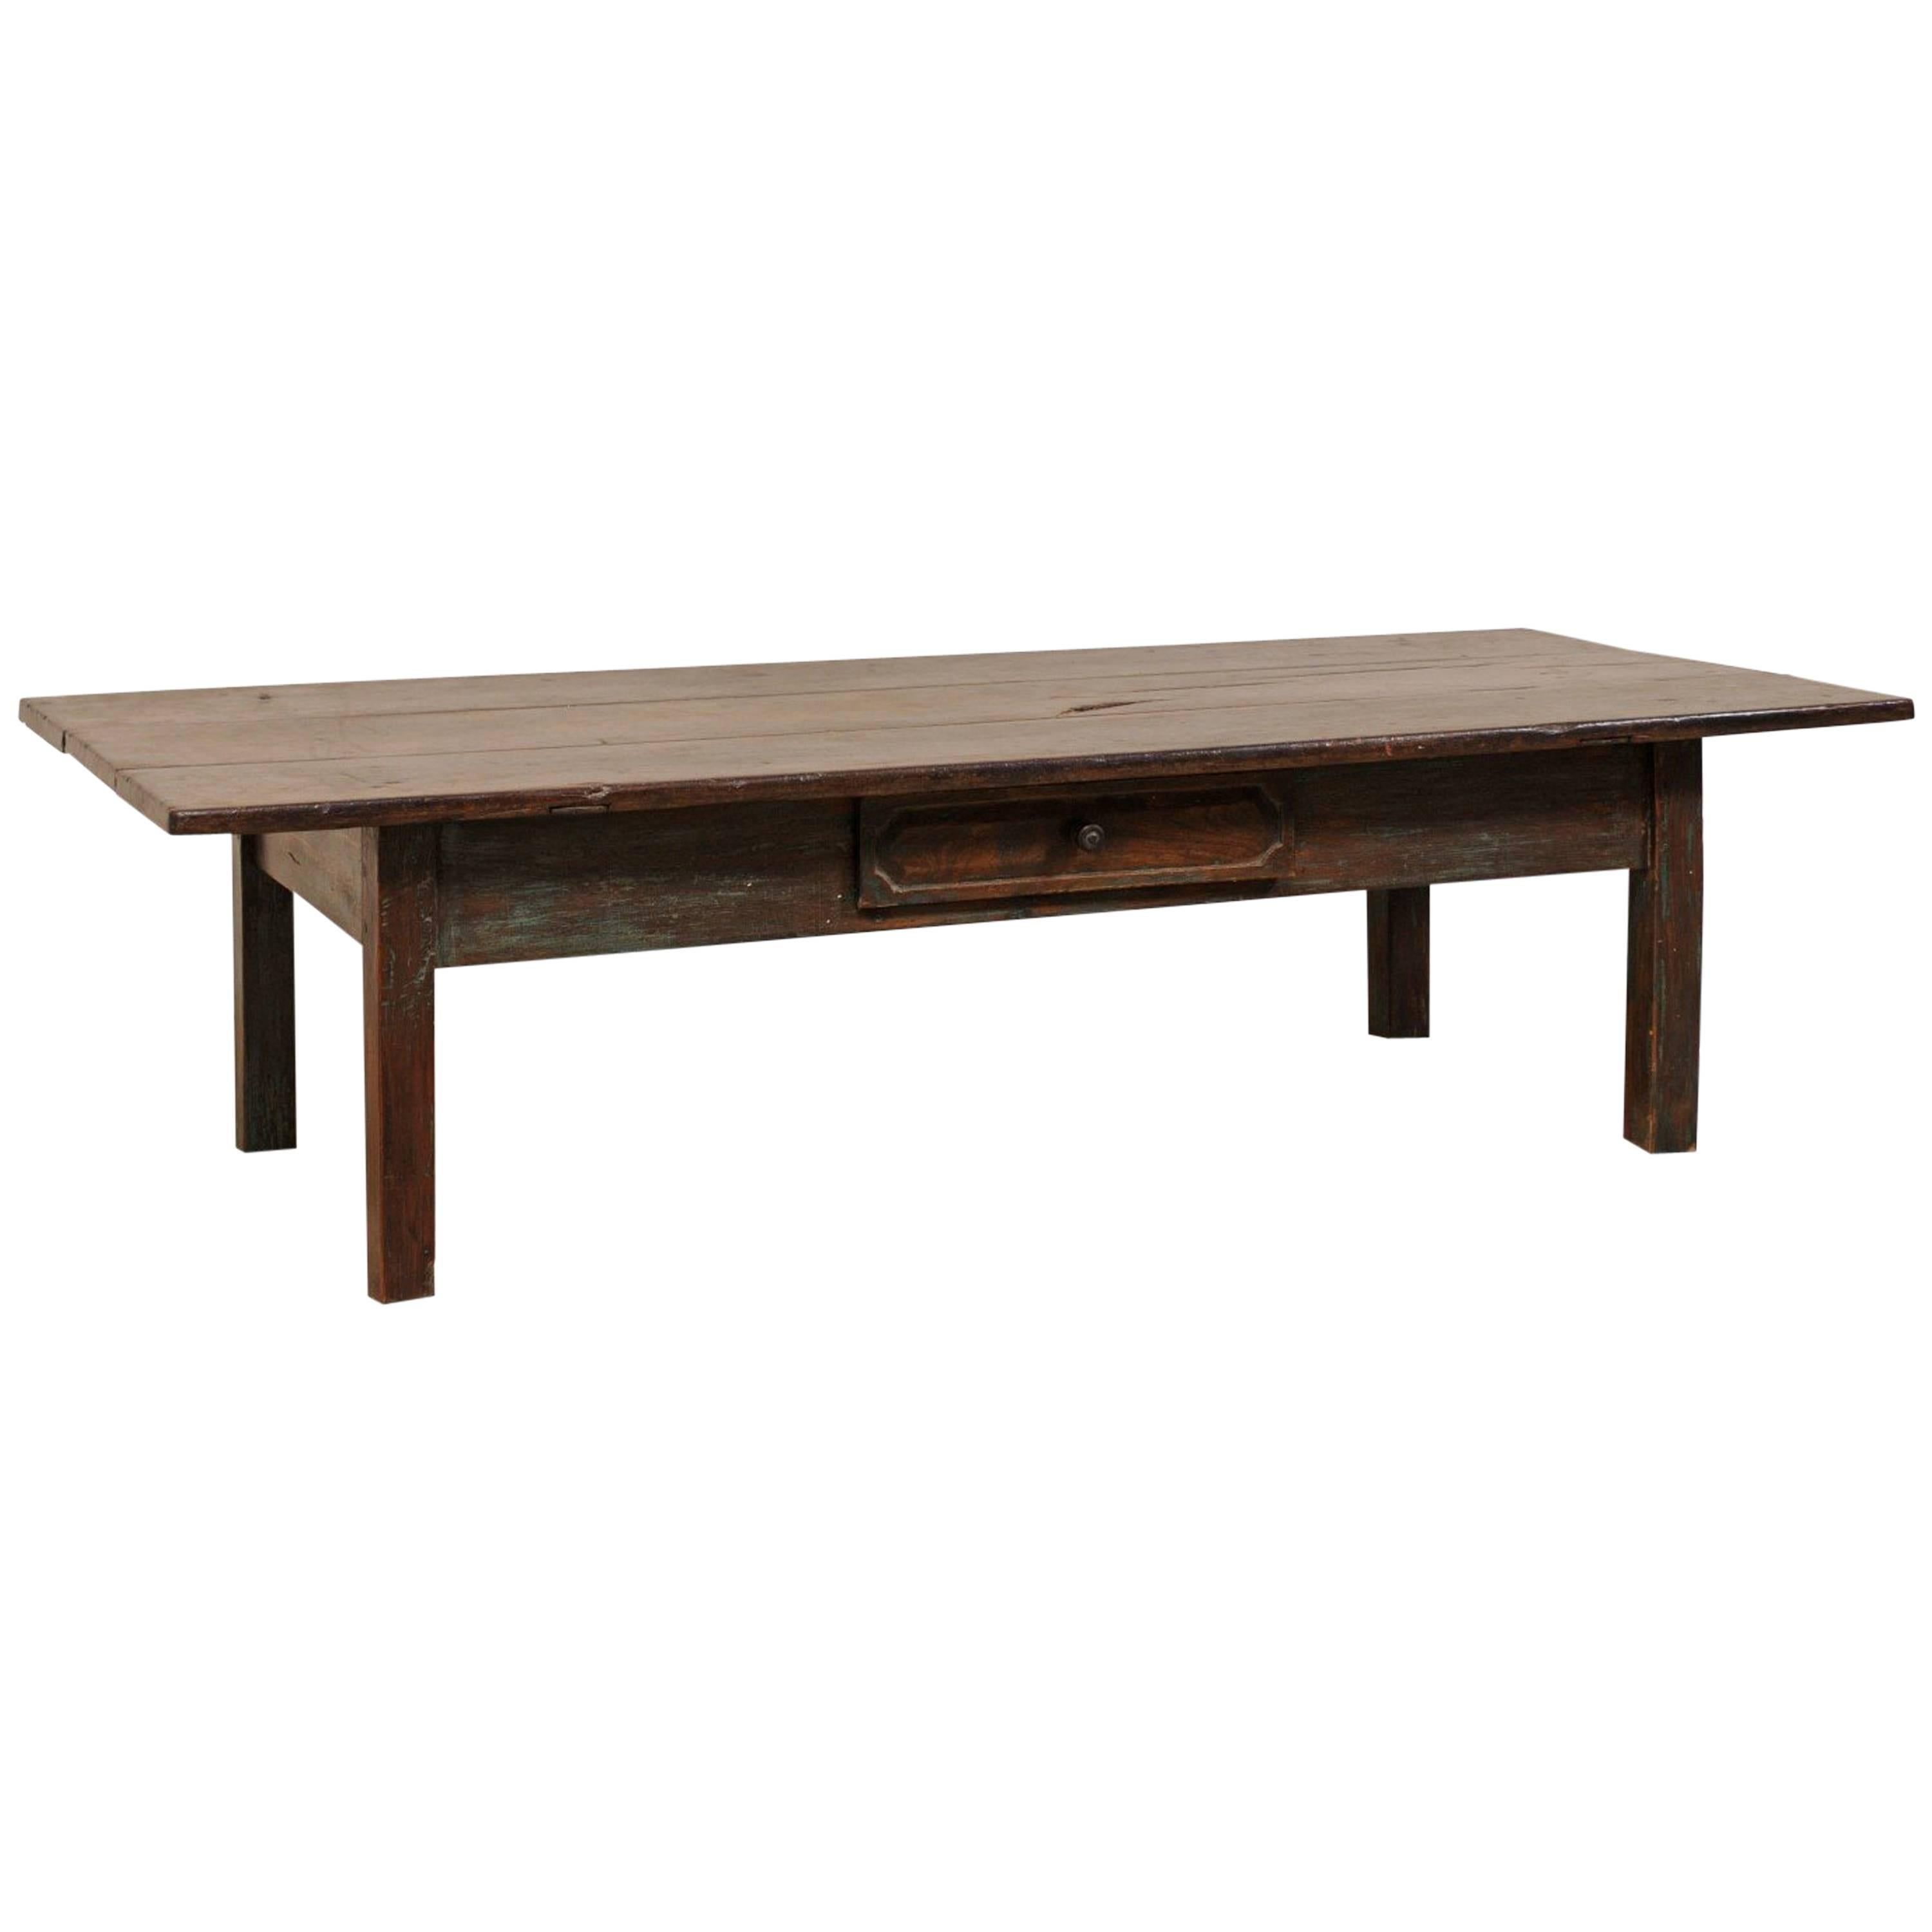 19th Century Brazilian Rustic Carved Peroba Wood Coffee Table with Single Drawer